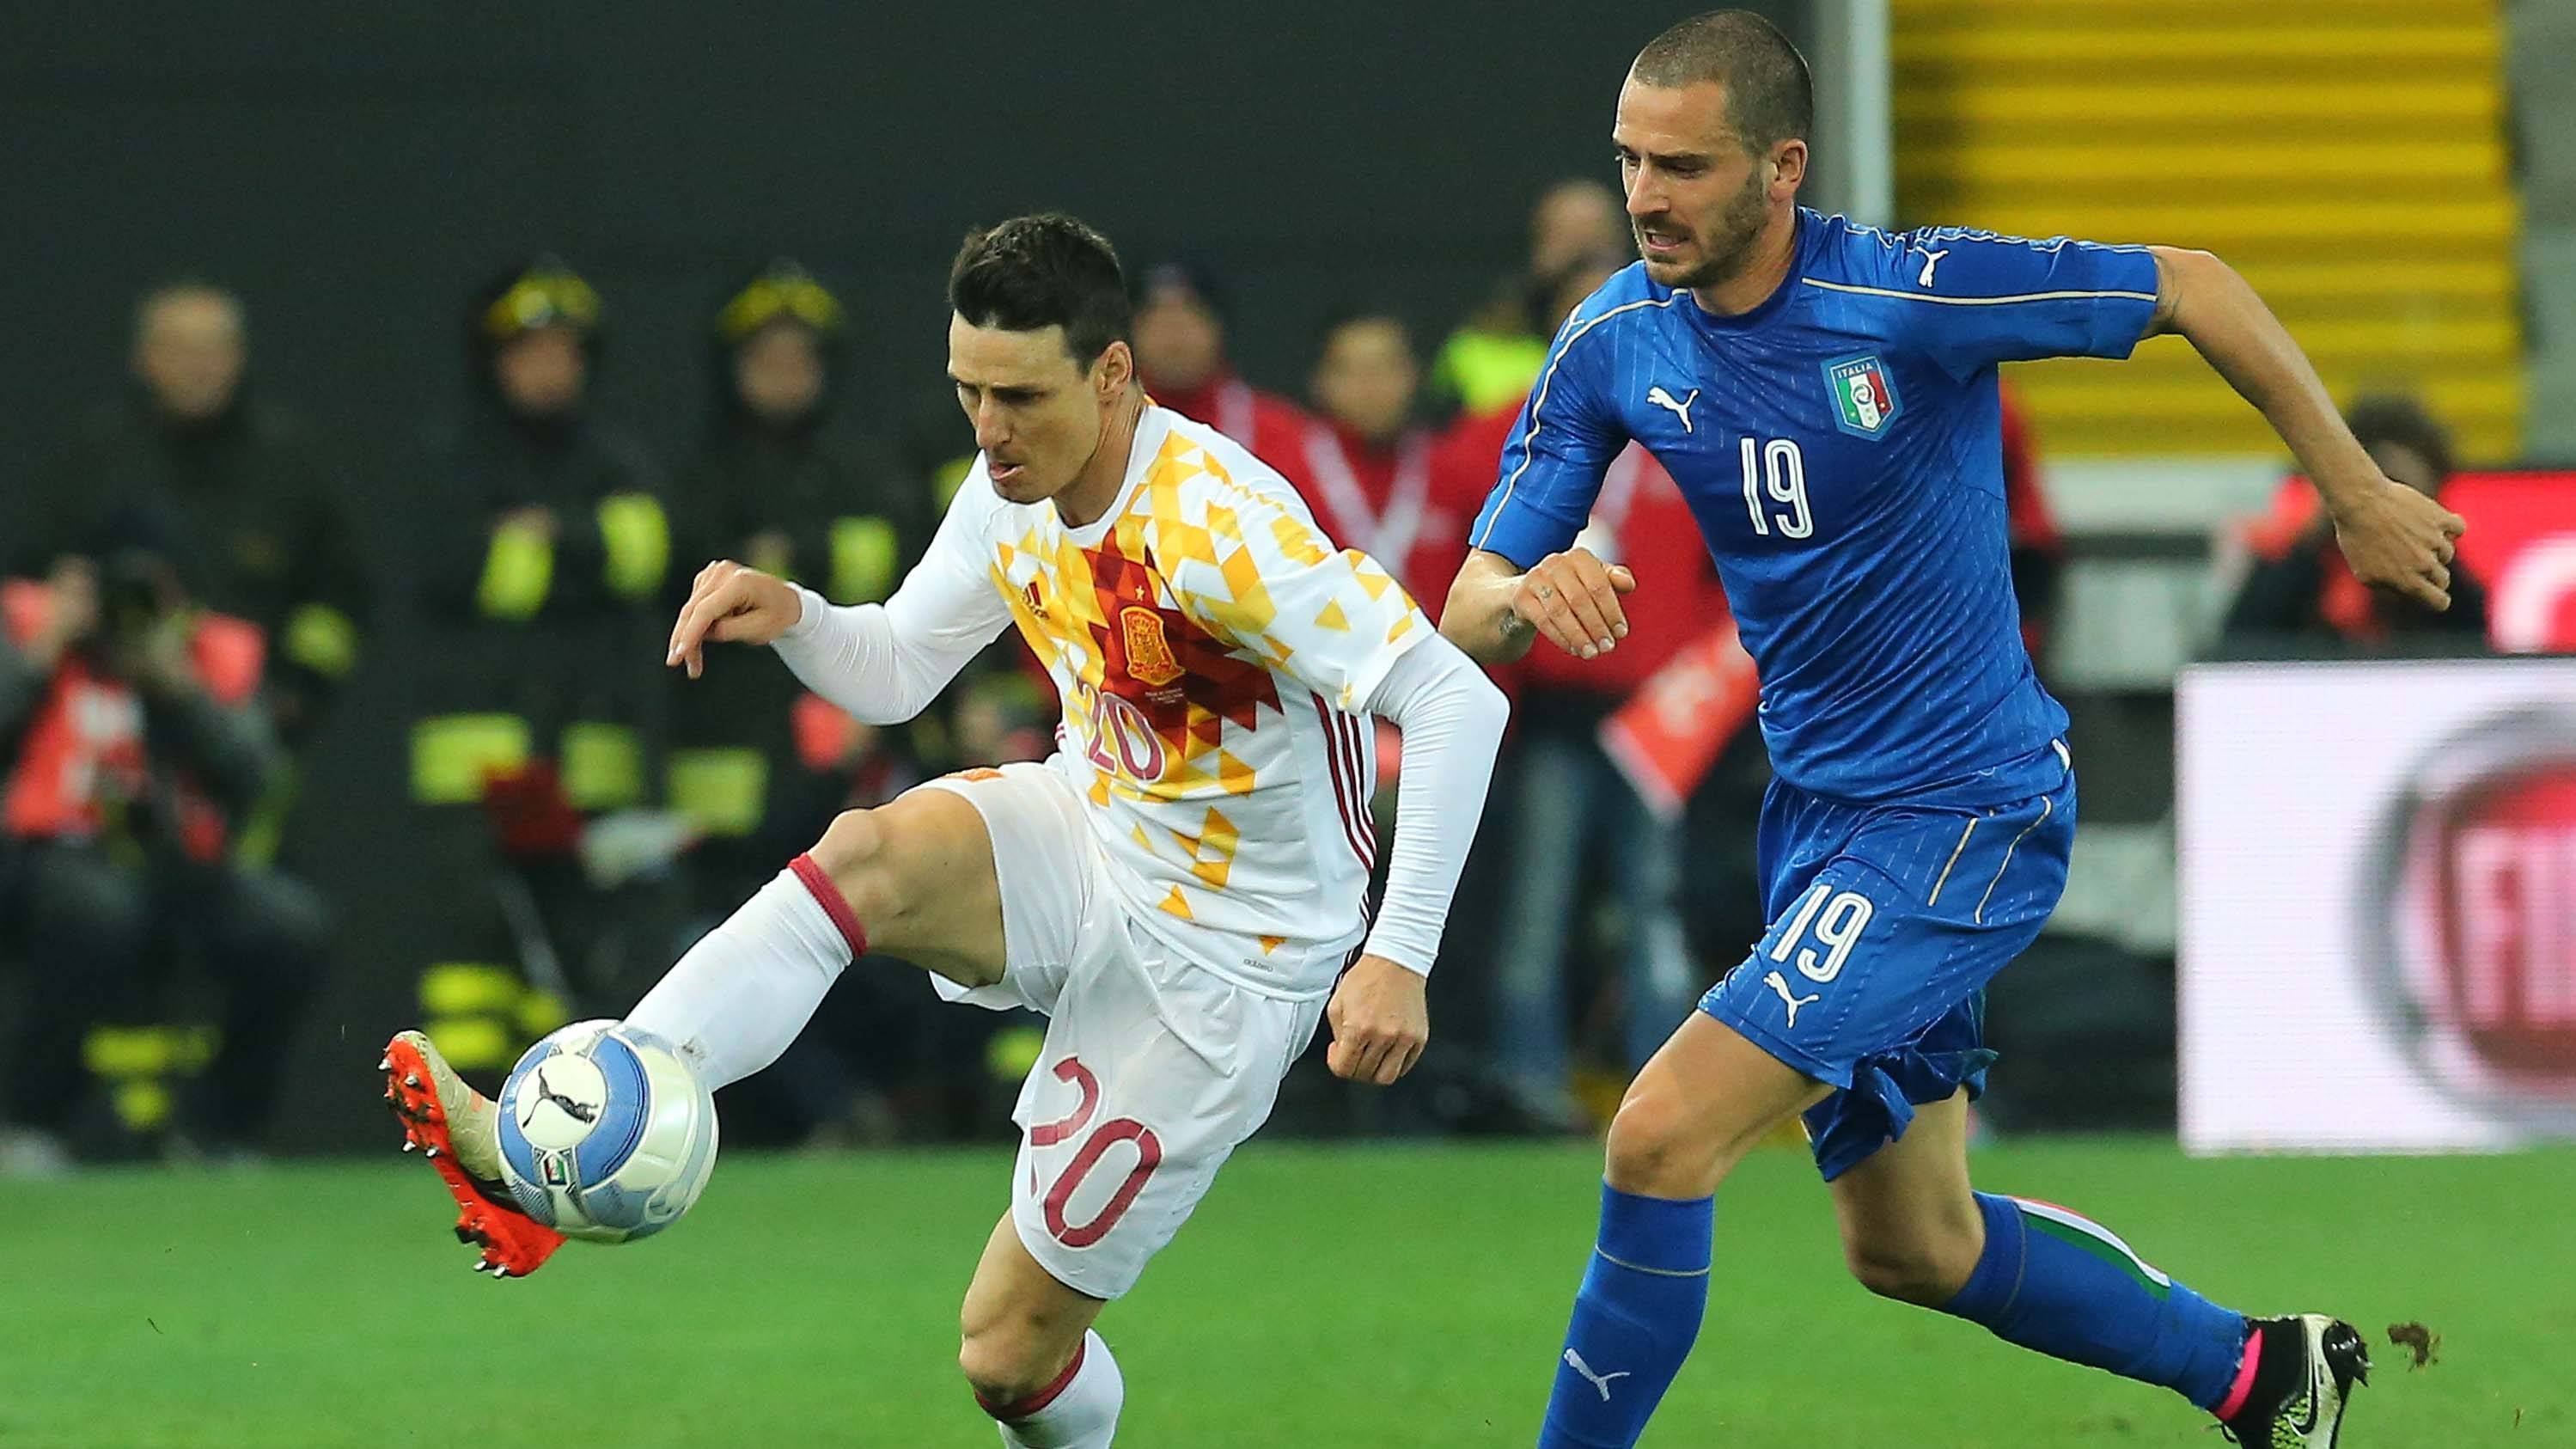 Aduriz Was the goleador of Spain against Italy